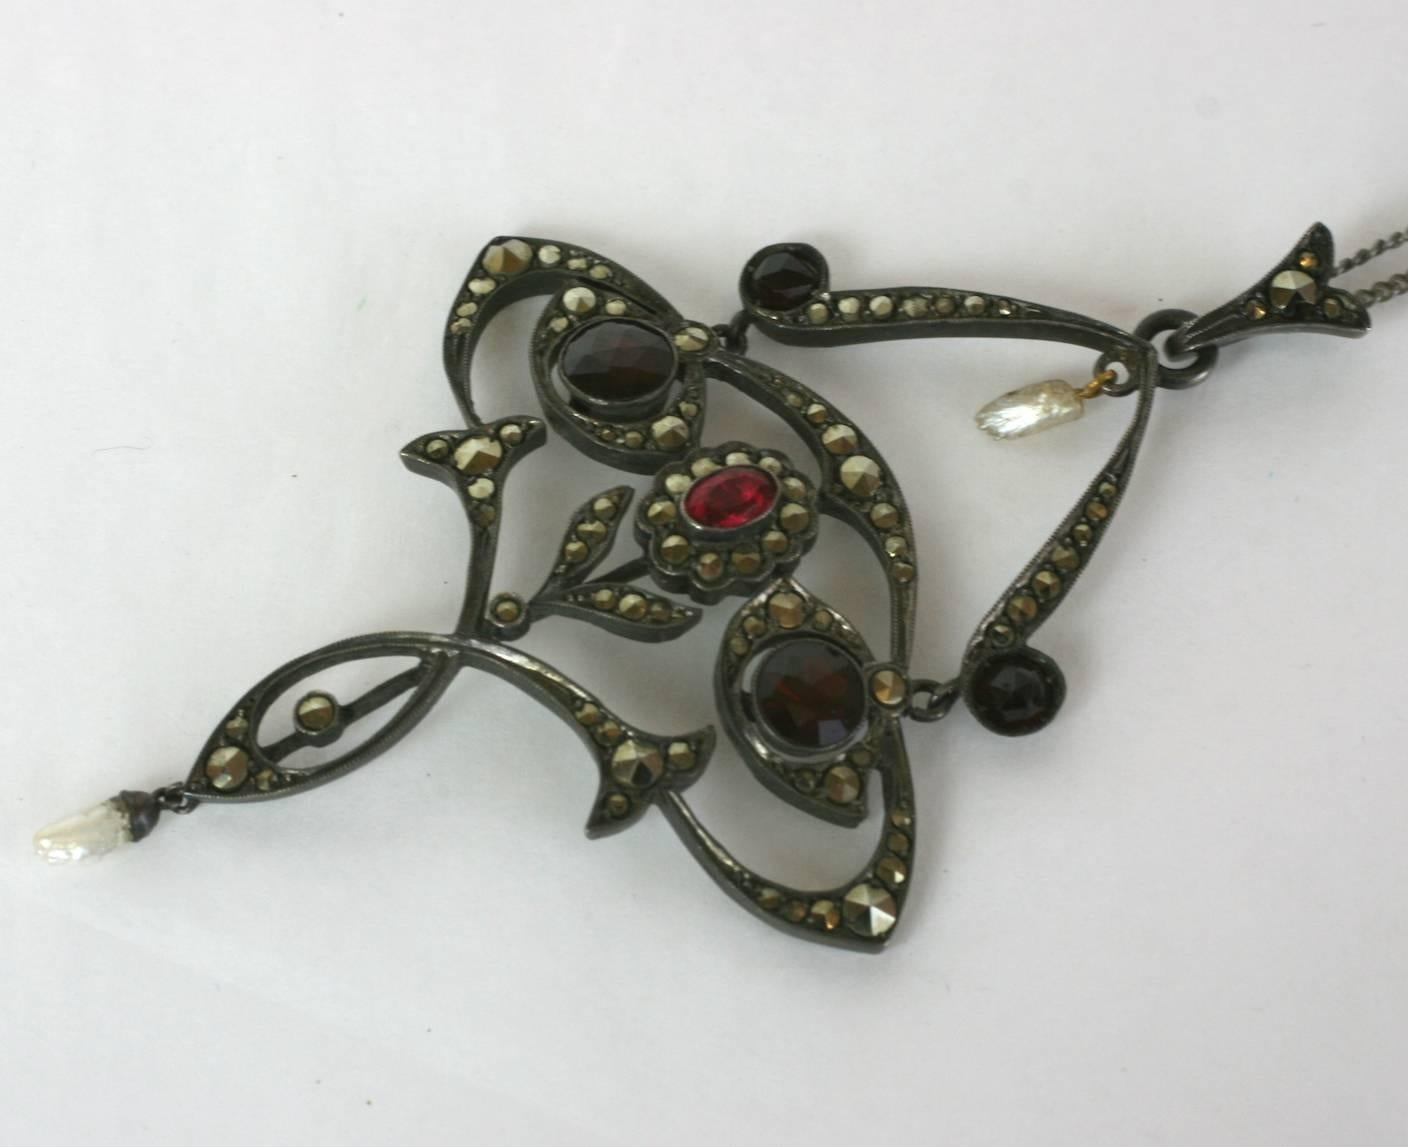 Lovely Edwardian Marcasite and Garnet Pendant of openwork sterling silver with Art Nouveau influences. Marcasites are set throughout with a central closed backed oval garnet and 2 flanking round garnets in unusual rose cuts. 2 tiny freshwater tooth